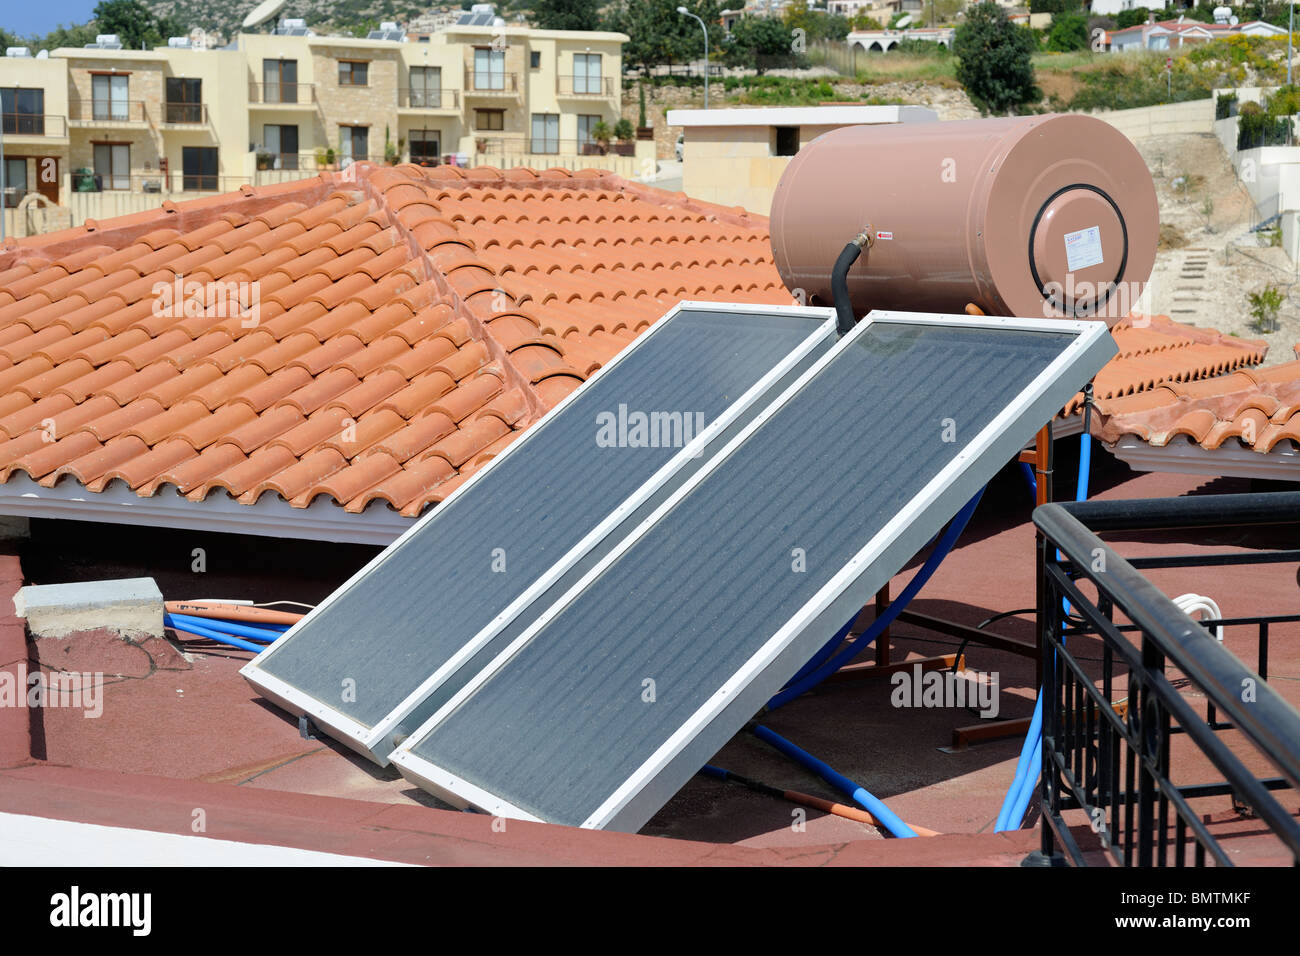 A solar water heating panel with water tank on the roof of a villa in Stock Photo, Royalty Free